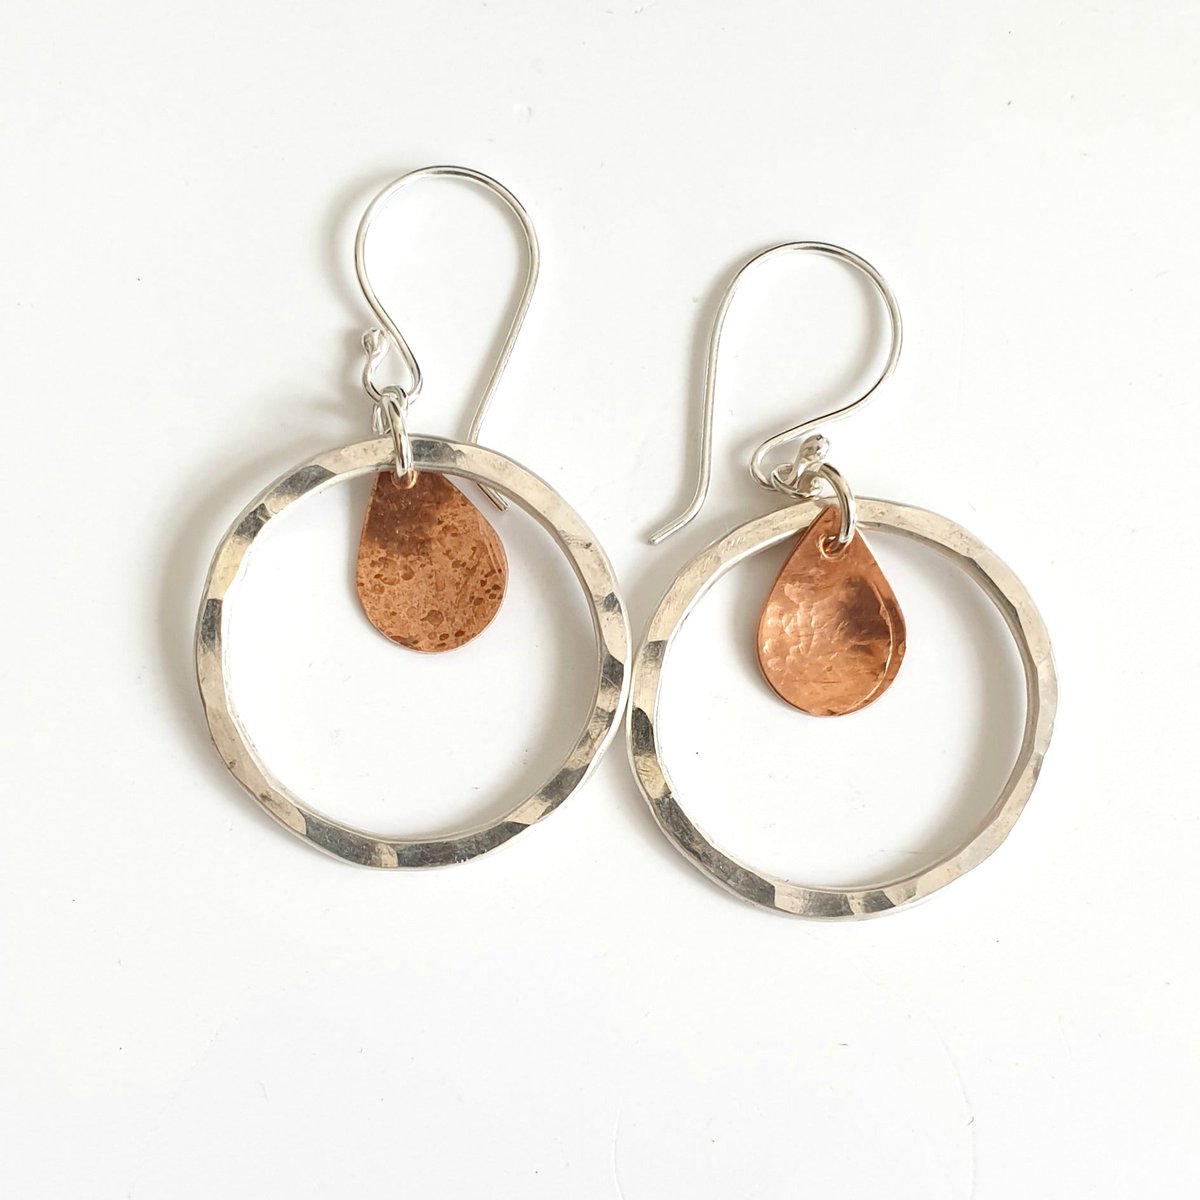 Silver and Copper Hoop Earrings tuppu.net/70fc8172 #inbizhour #MHHSBD #shopsmall ##UKGiftHour #HandmadeHour #bizbubble #UKHashtags #giftideas #Circle